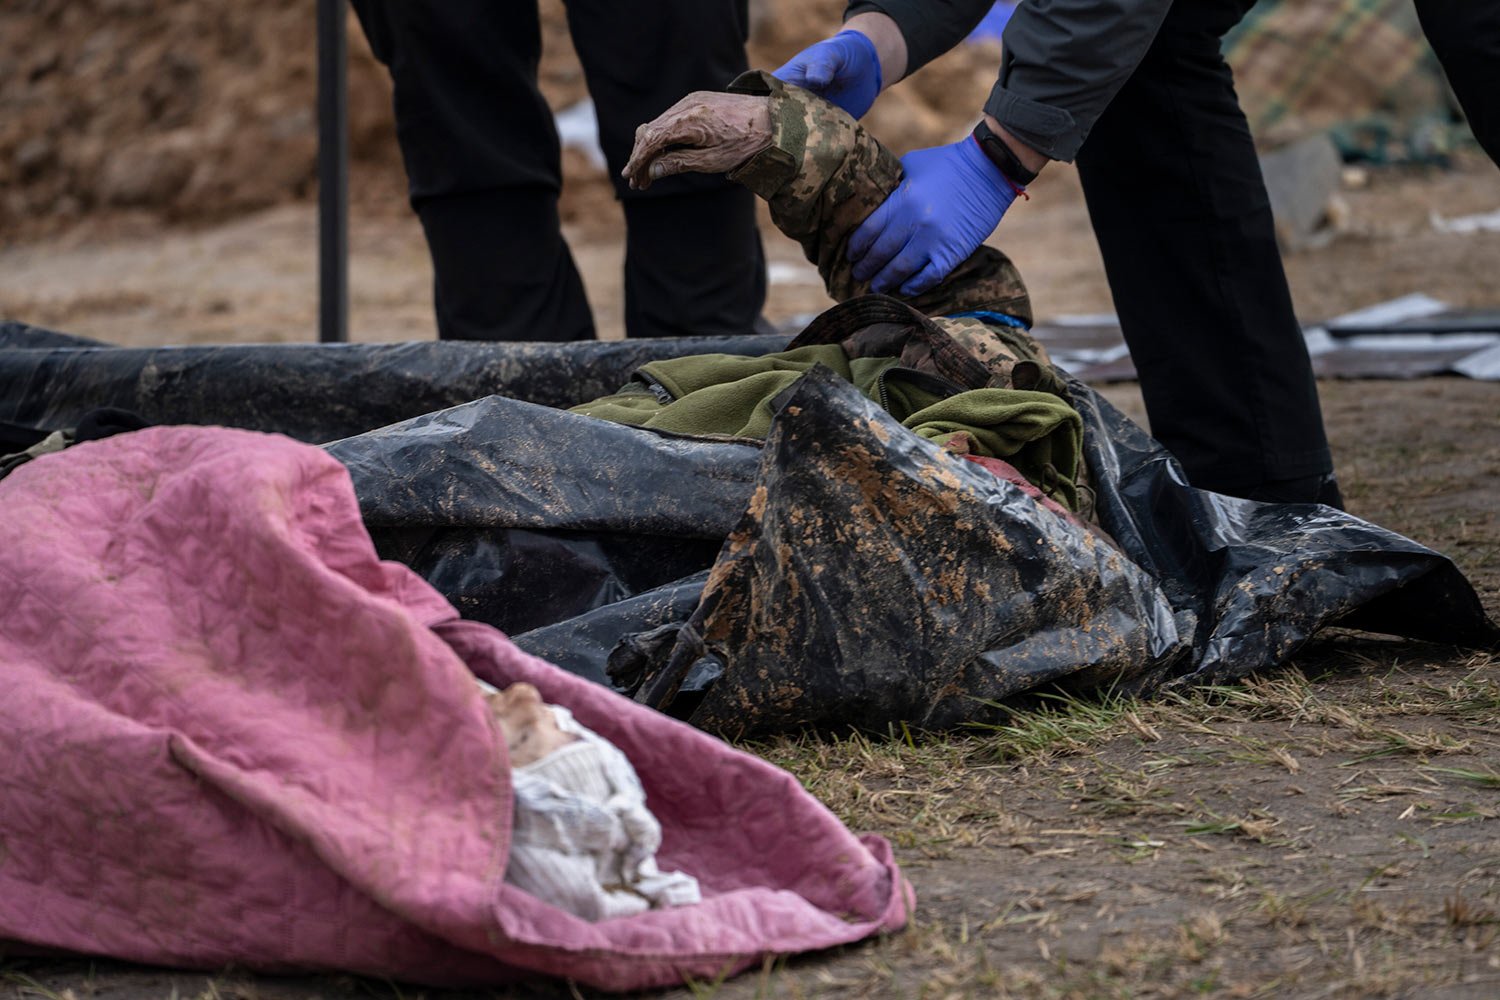  A policeman examines the corpse of a Ukrainian soldier removed from a mass grave in Bucha, on the outskirts of Kyiv, Ukraine, Monday, April 11, 2022. (AP Photo/Rodrigo Abd) 